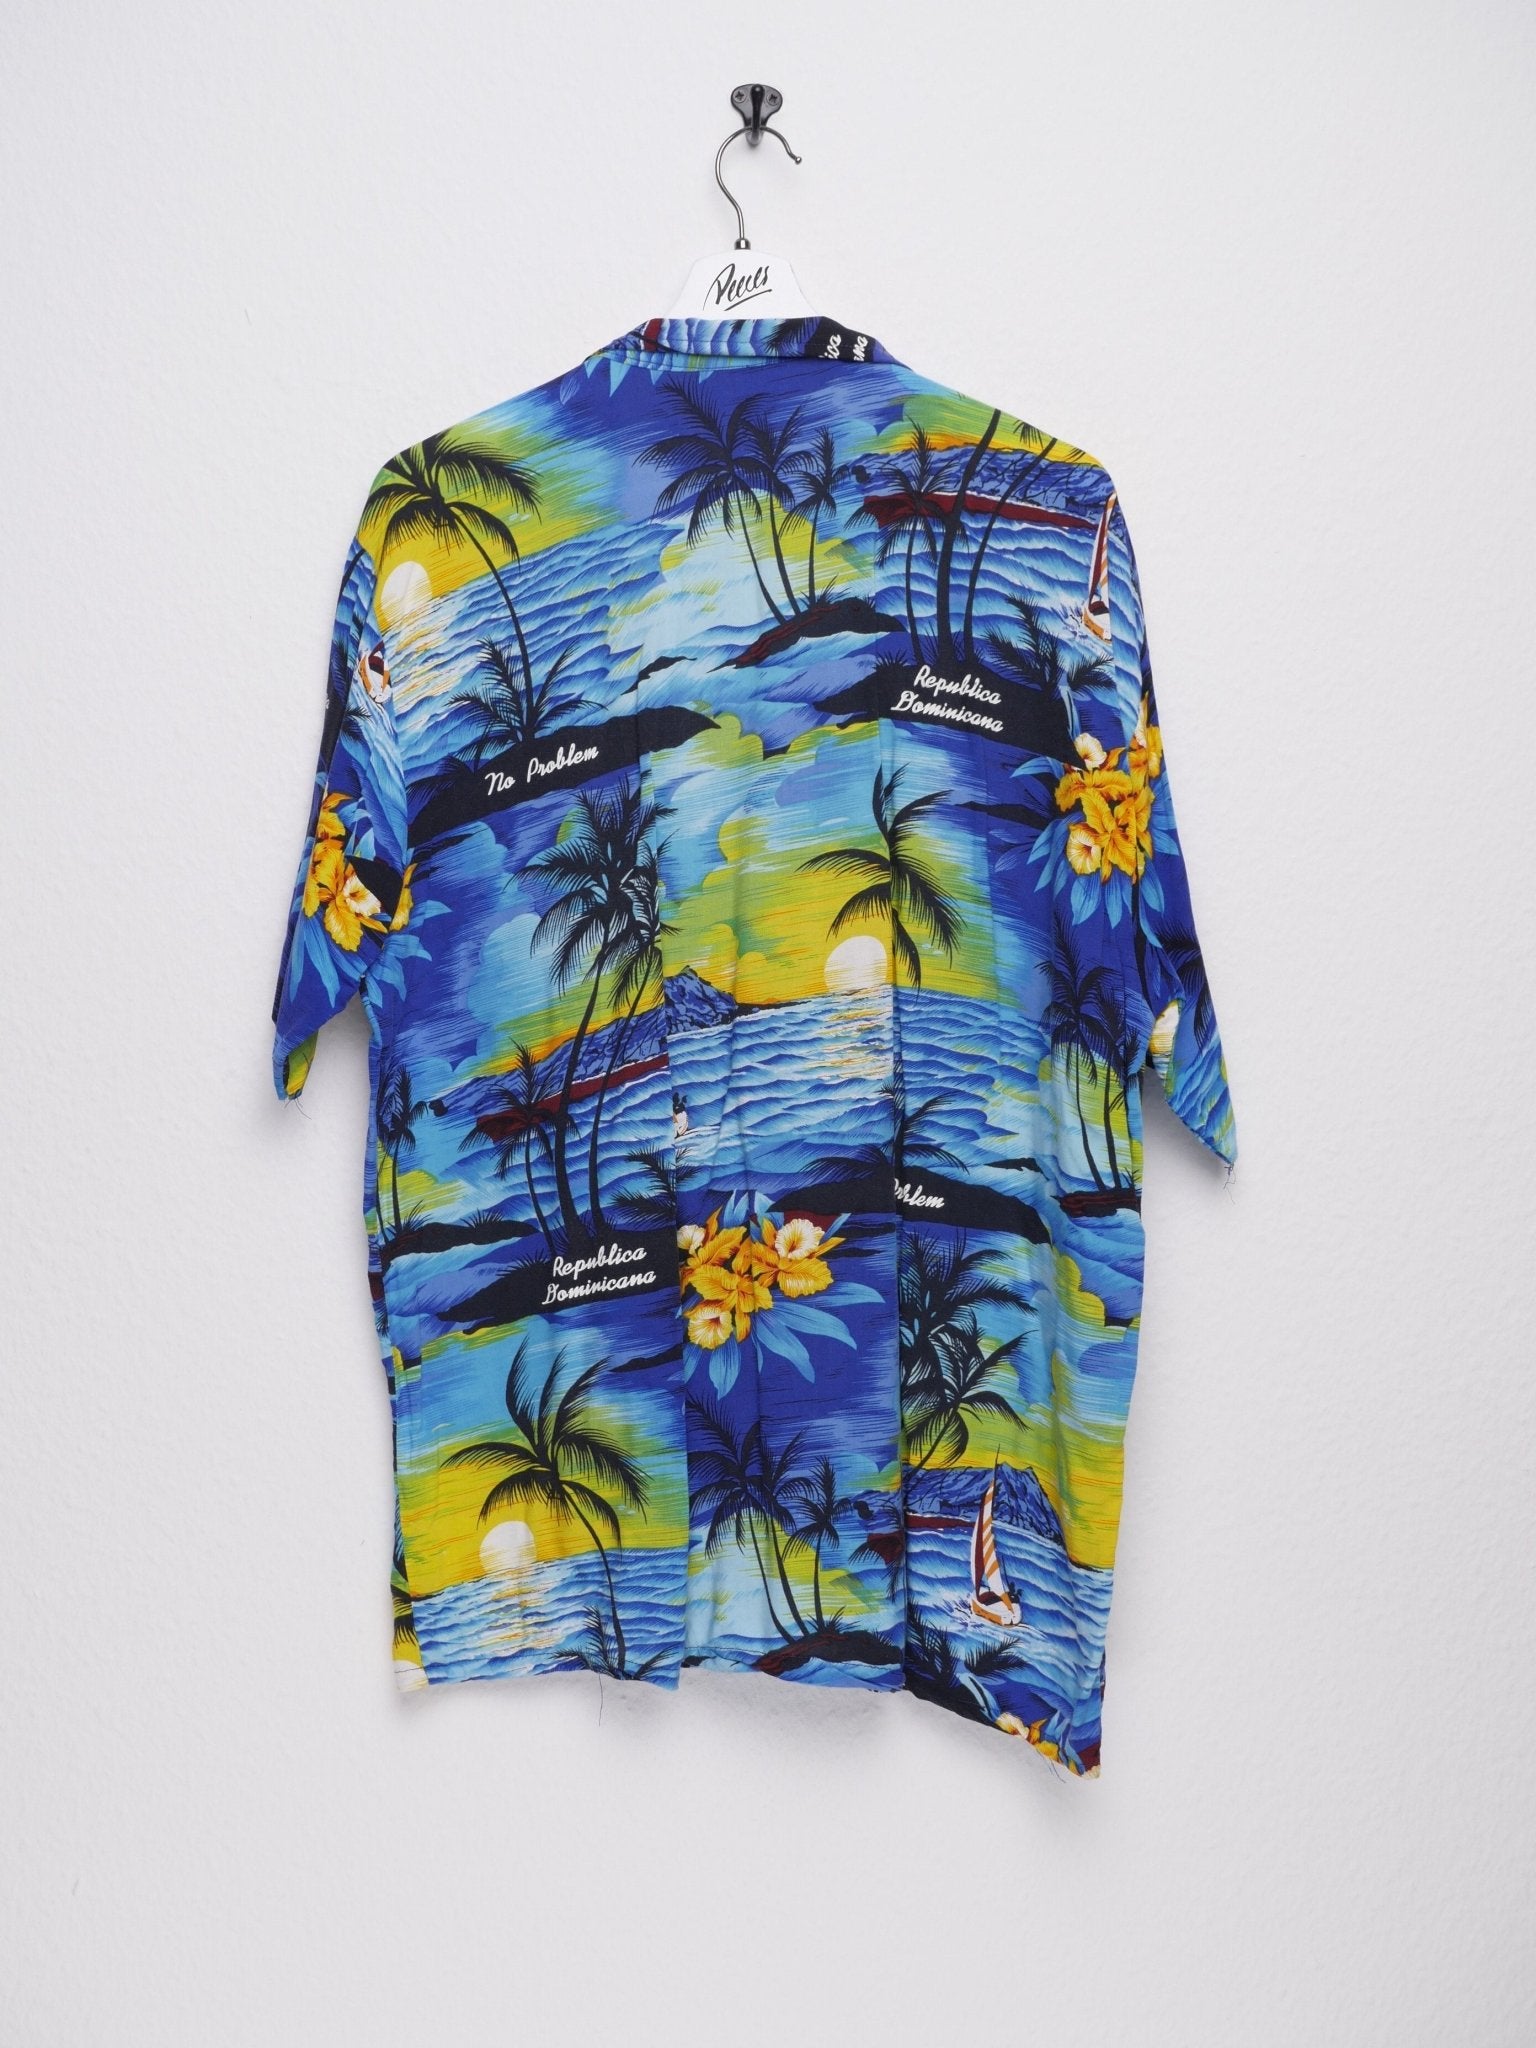 printed Hawaii Pattern buttoned S/S Hemd - Peeces